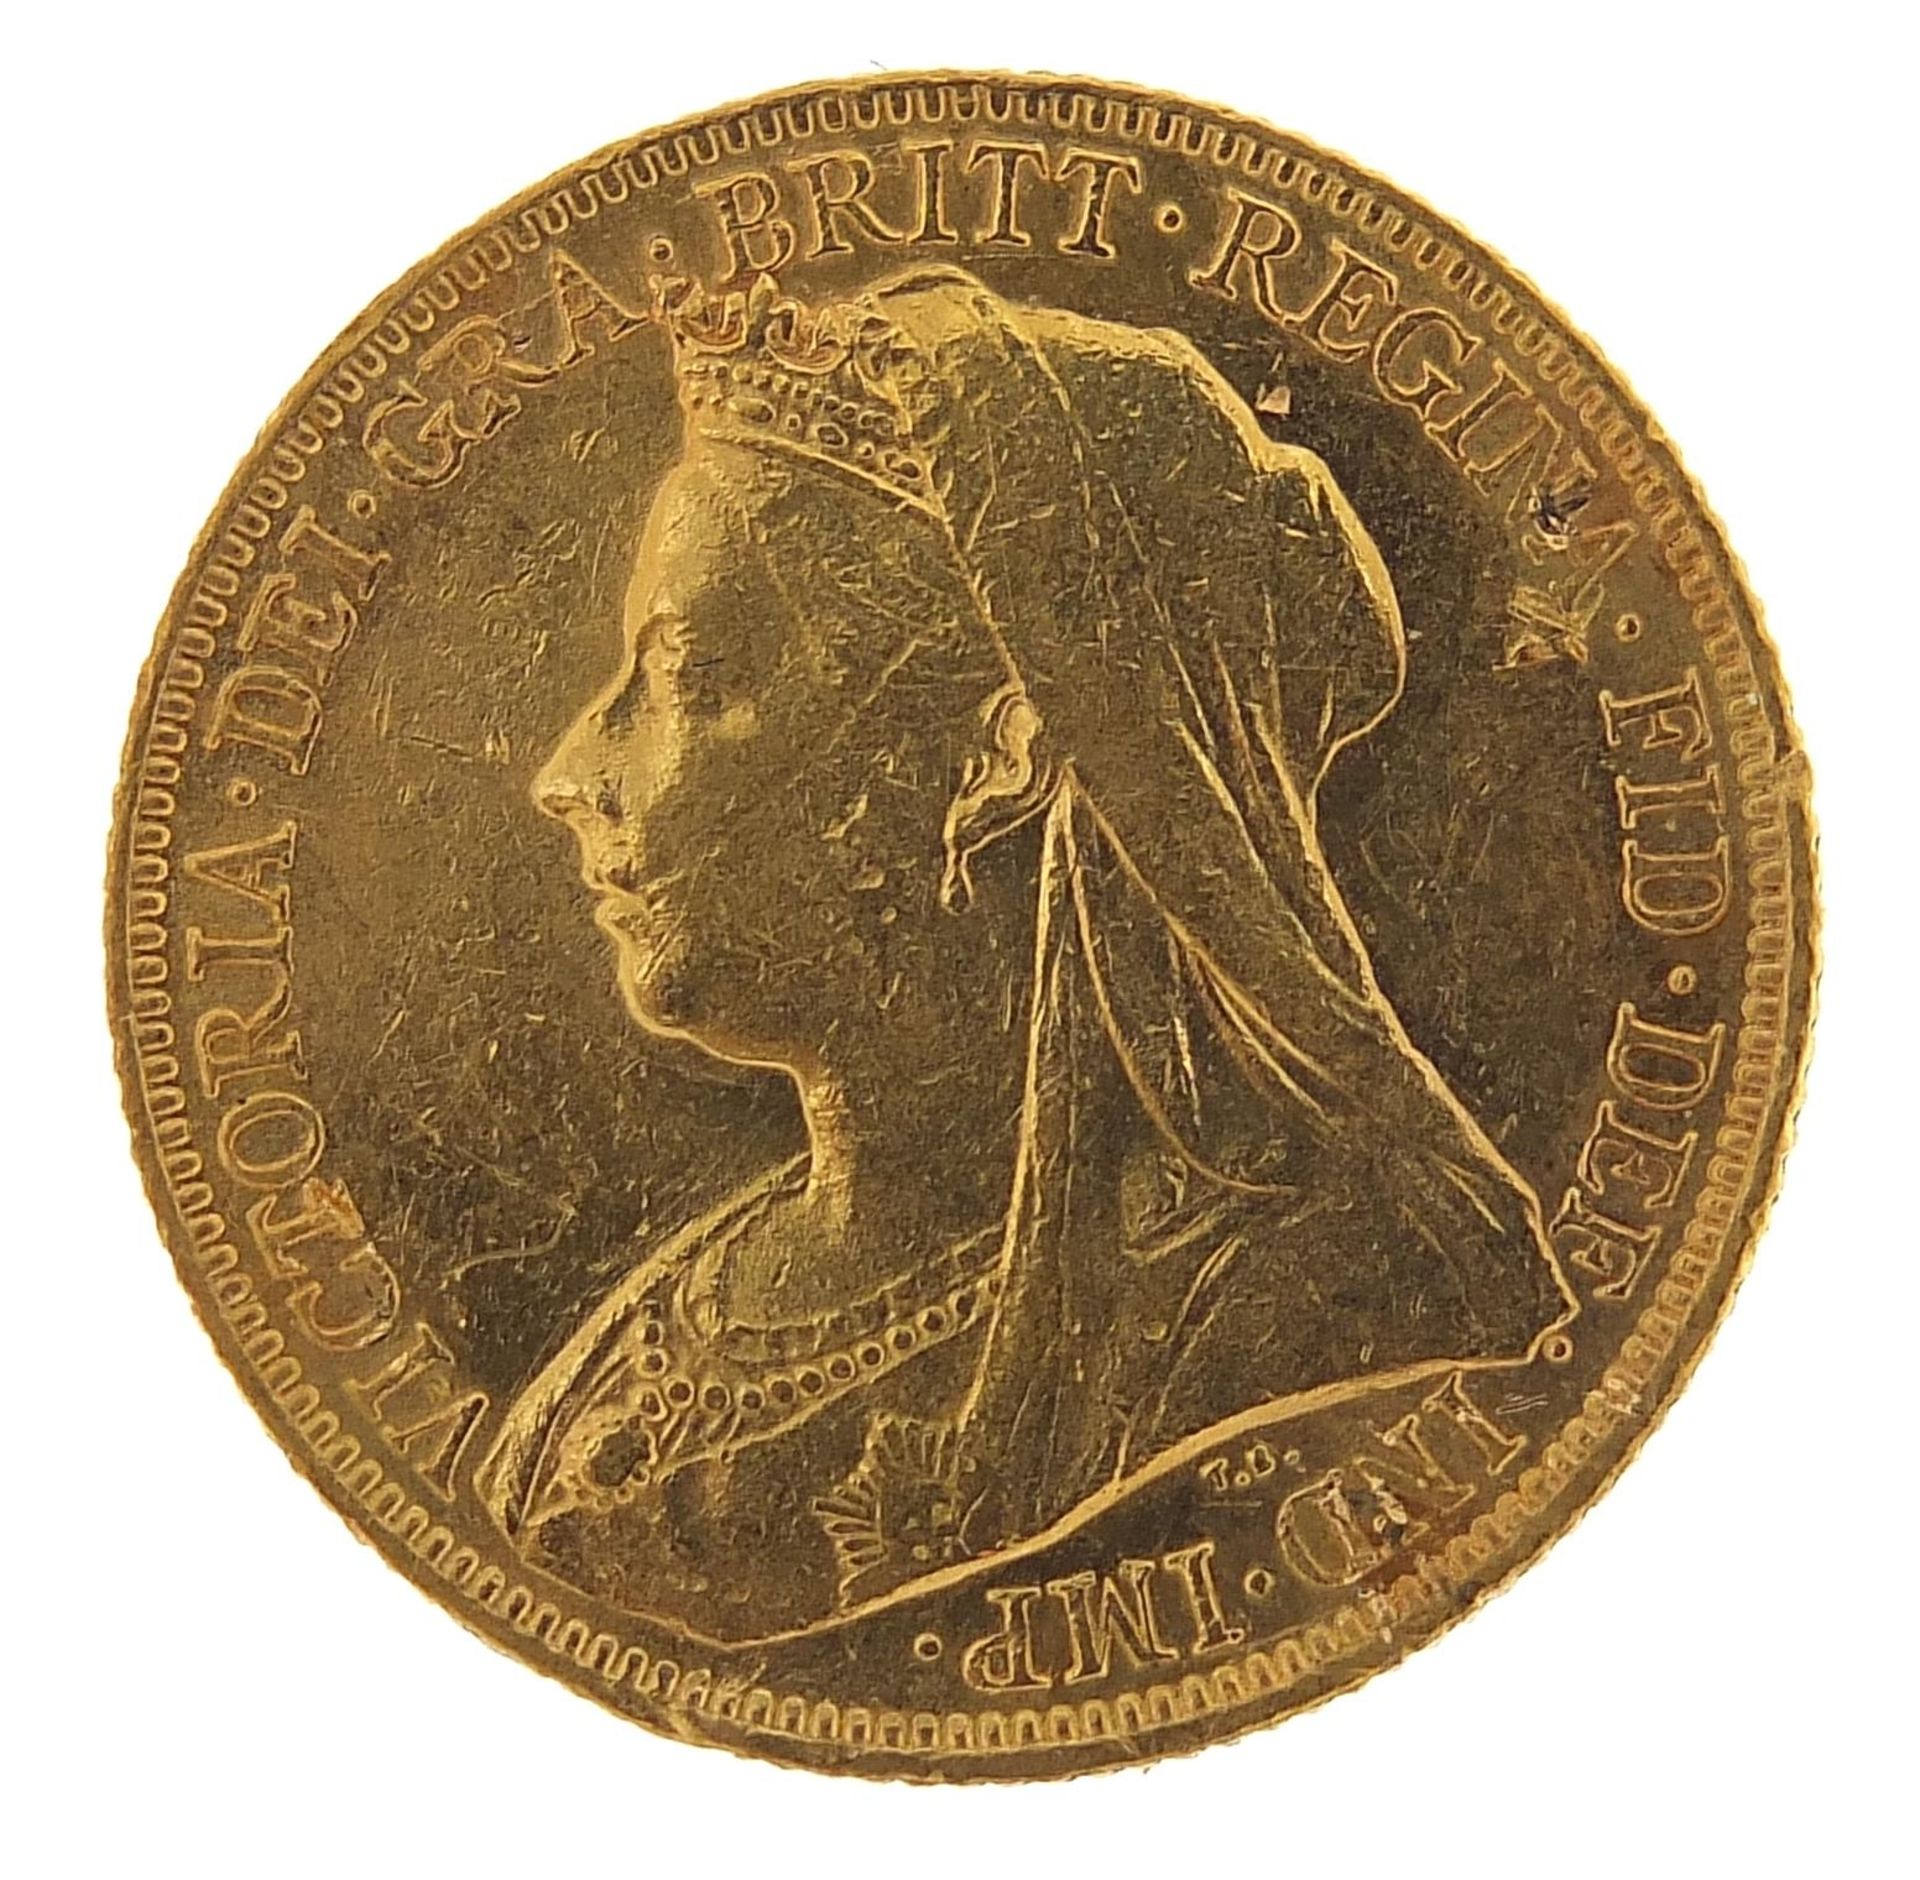 Queen Victoria 1899 gold sovereign, Sydney mint - this lot is sold without buyer’s premium - Image 2 of 3